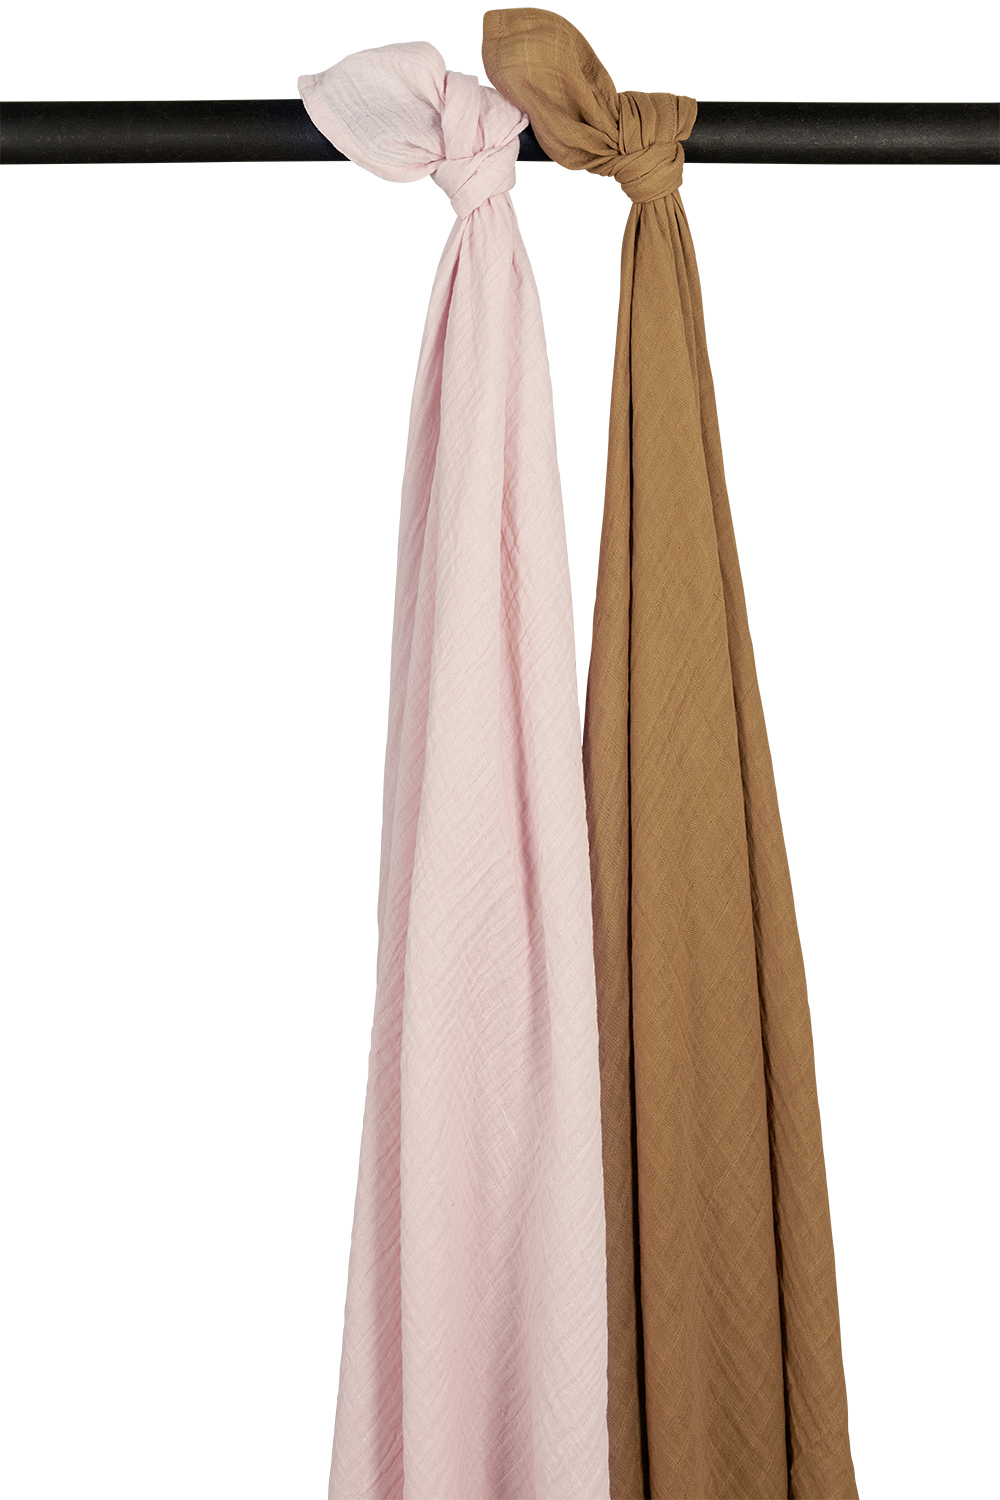 Swaddle  2er pack pre-washed musselin Uni - soft pink/toffee - 120x120cm